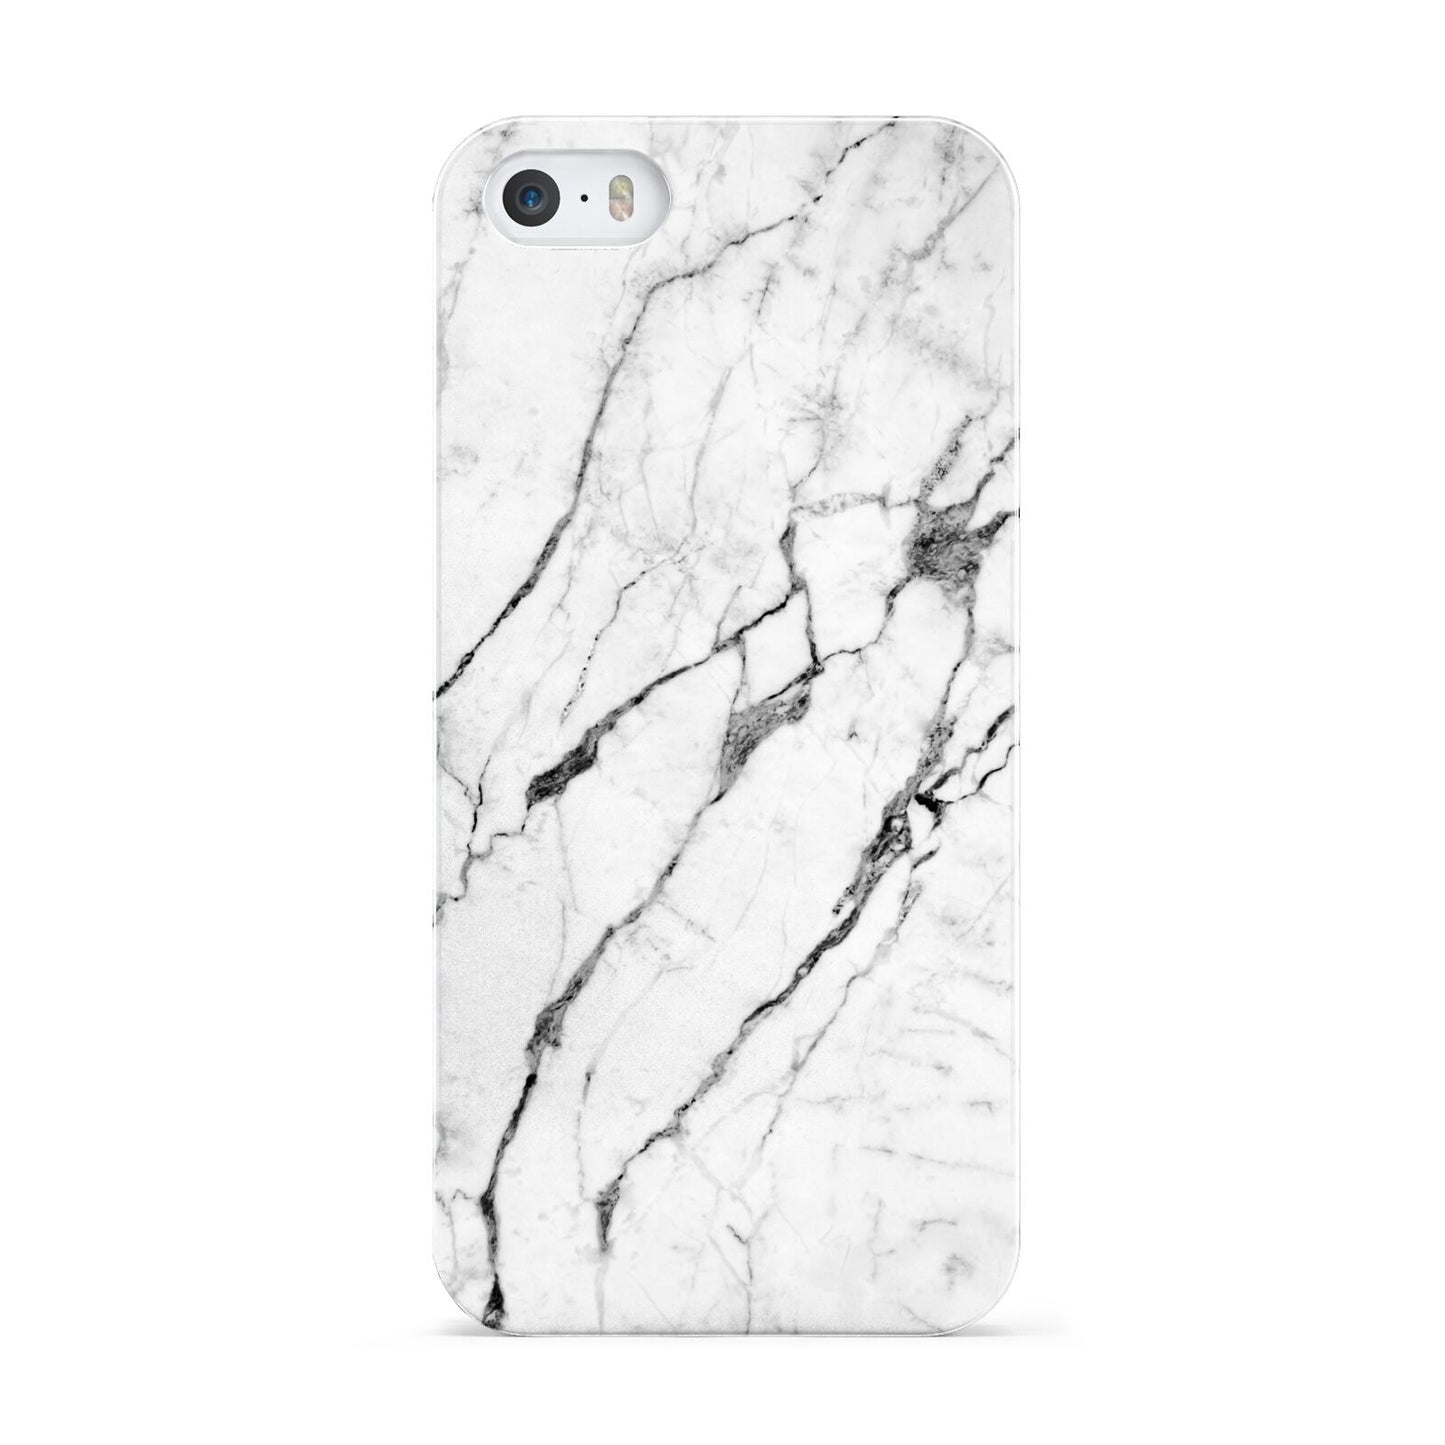 Marble White Apple iPhone 5 Case